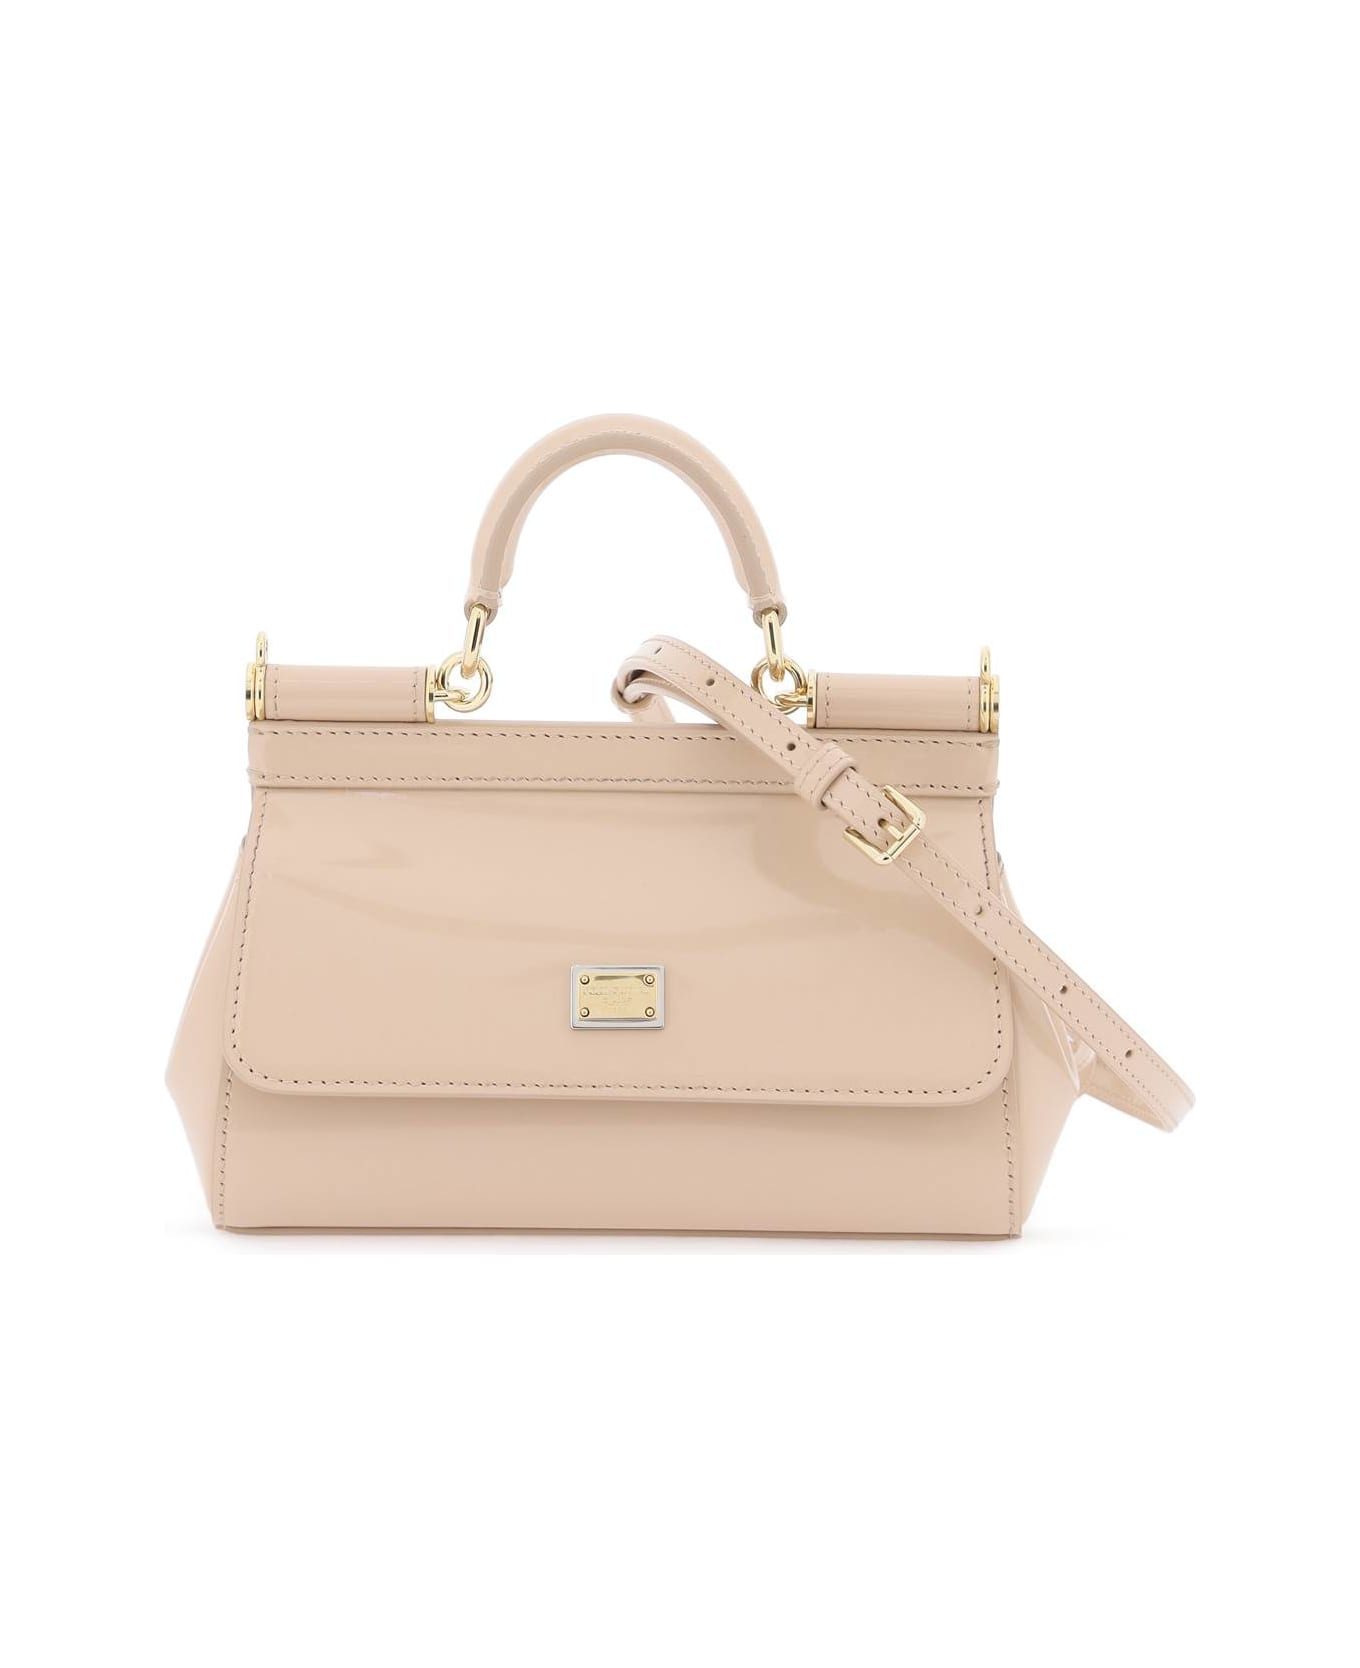 Dolce & Gabbana Sicily' Leather Bag Nude - Pink トートバッグ